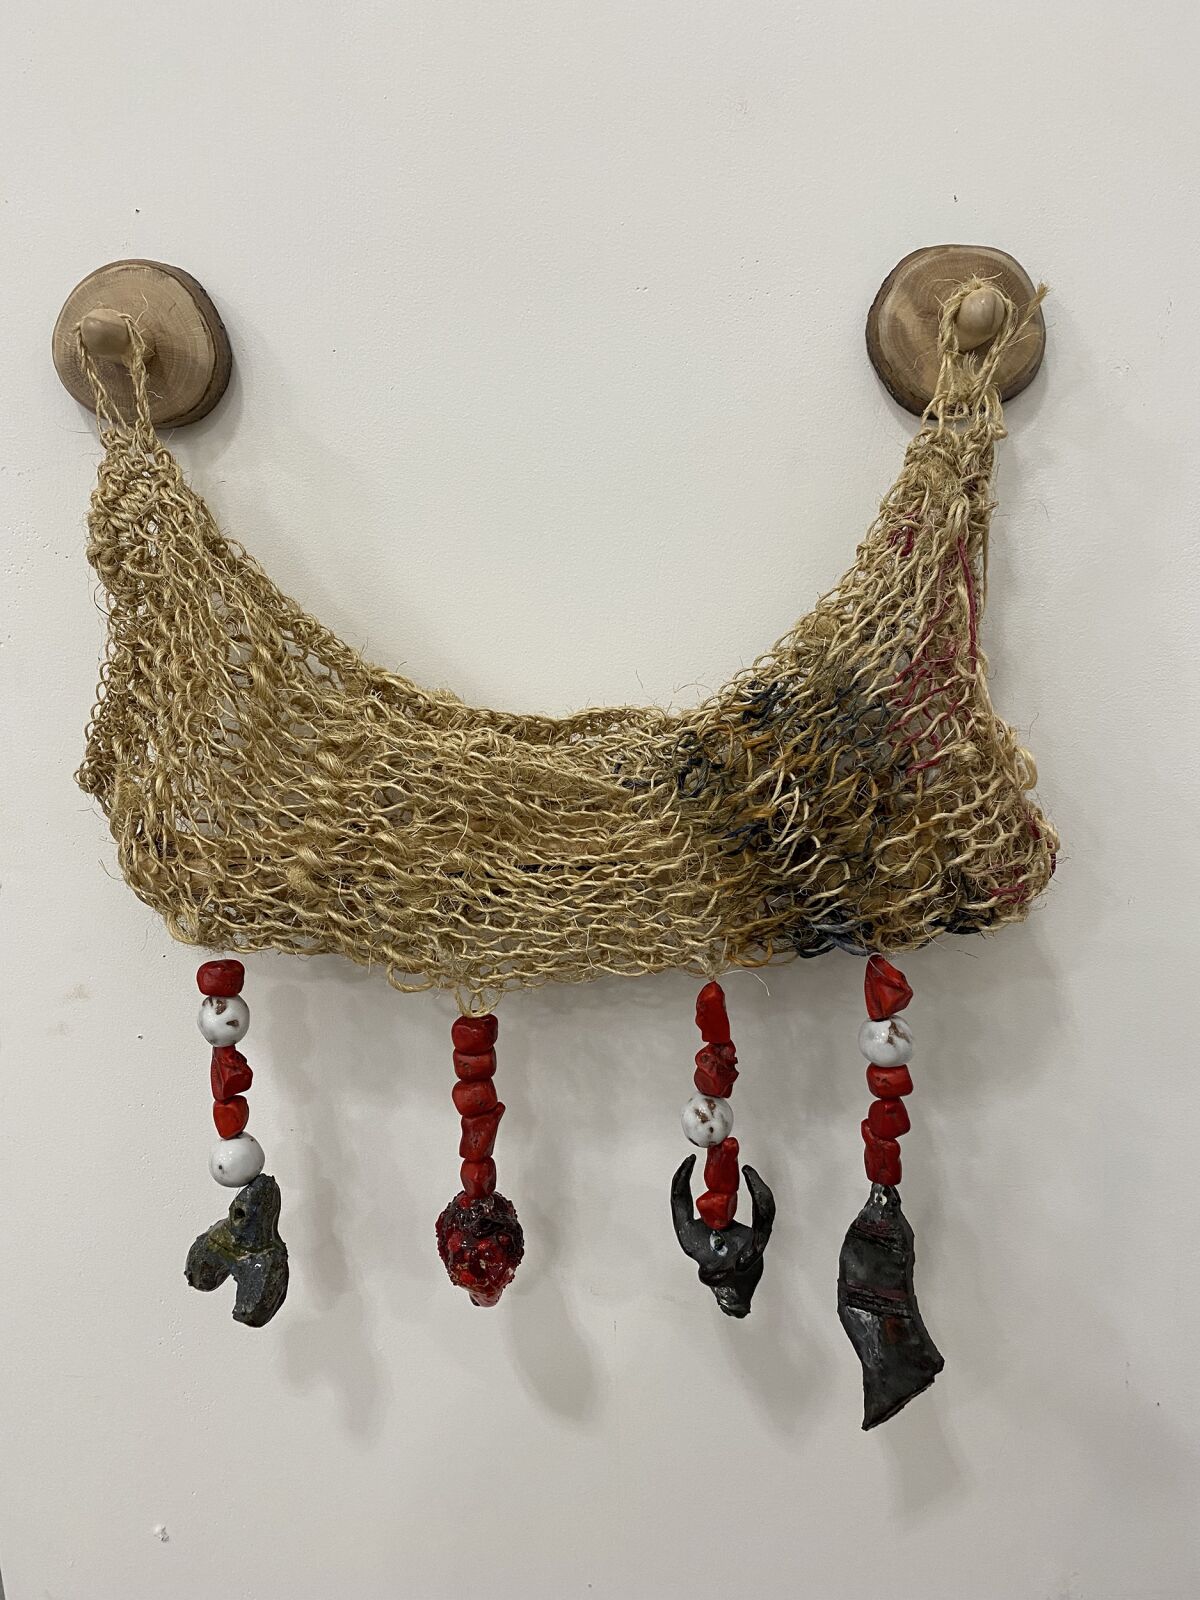 A knitted cradle with charms hanging from it.